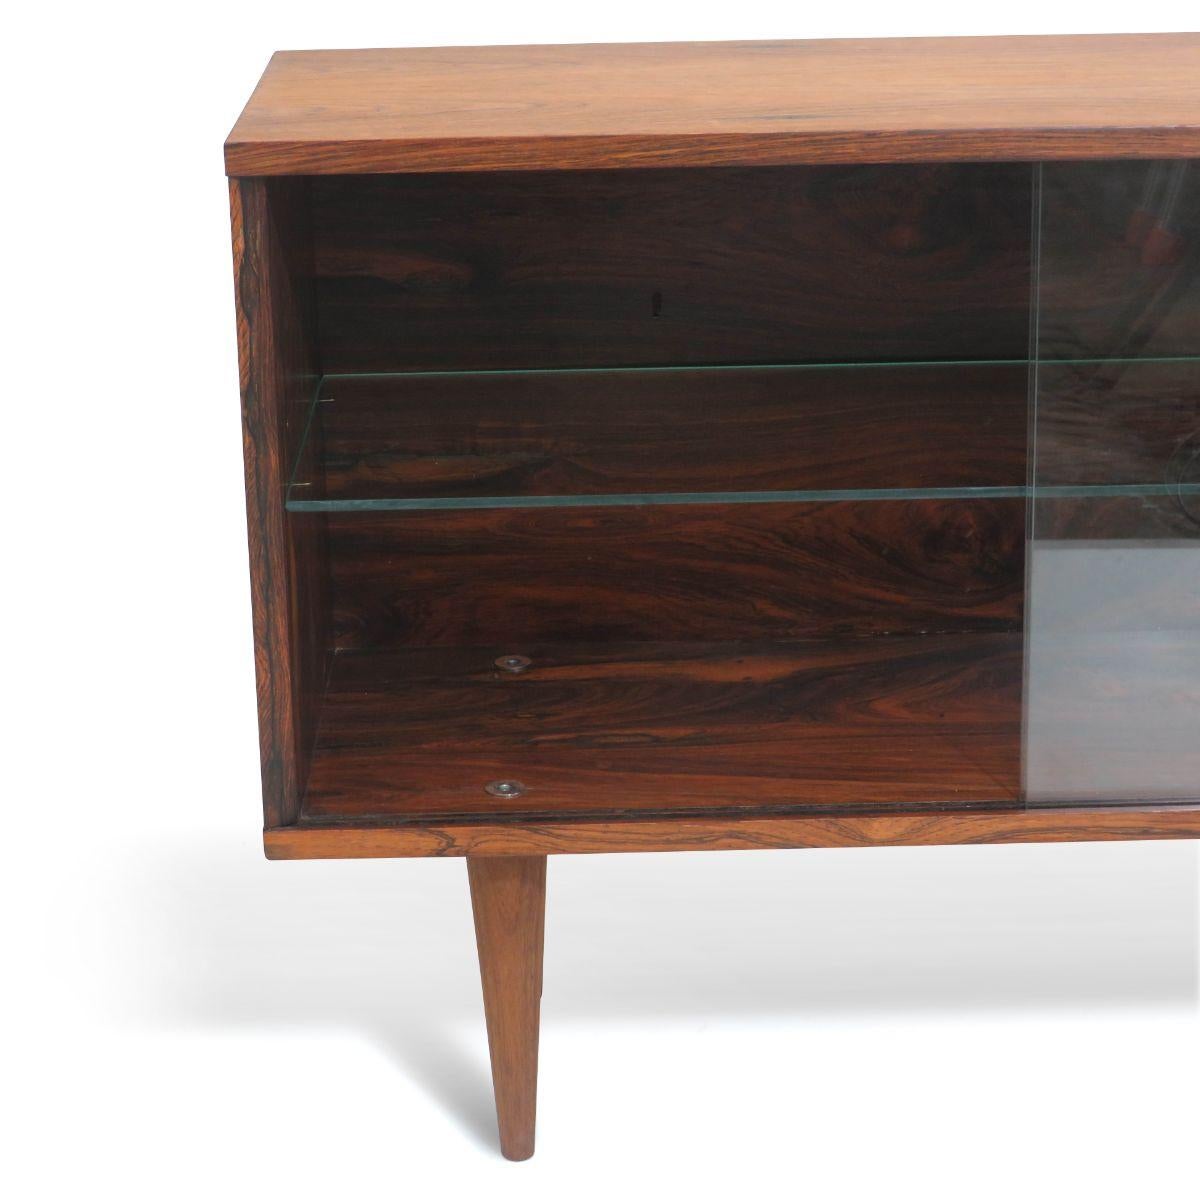 Mid-Century Modern rosewood cabinet, circa 1955 manufactured in Denmark. Crafted of rosewood with adjustable glass shelf and two glass sliding doors, raised on tapered legs. Modest proportions make for a versatile cabinet appropriate as a